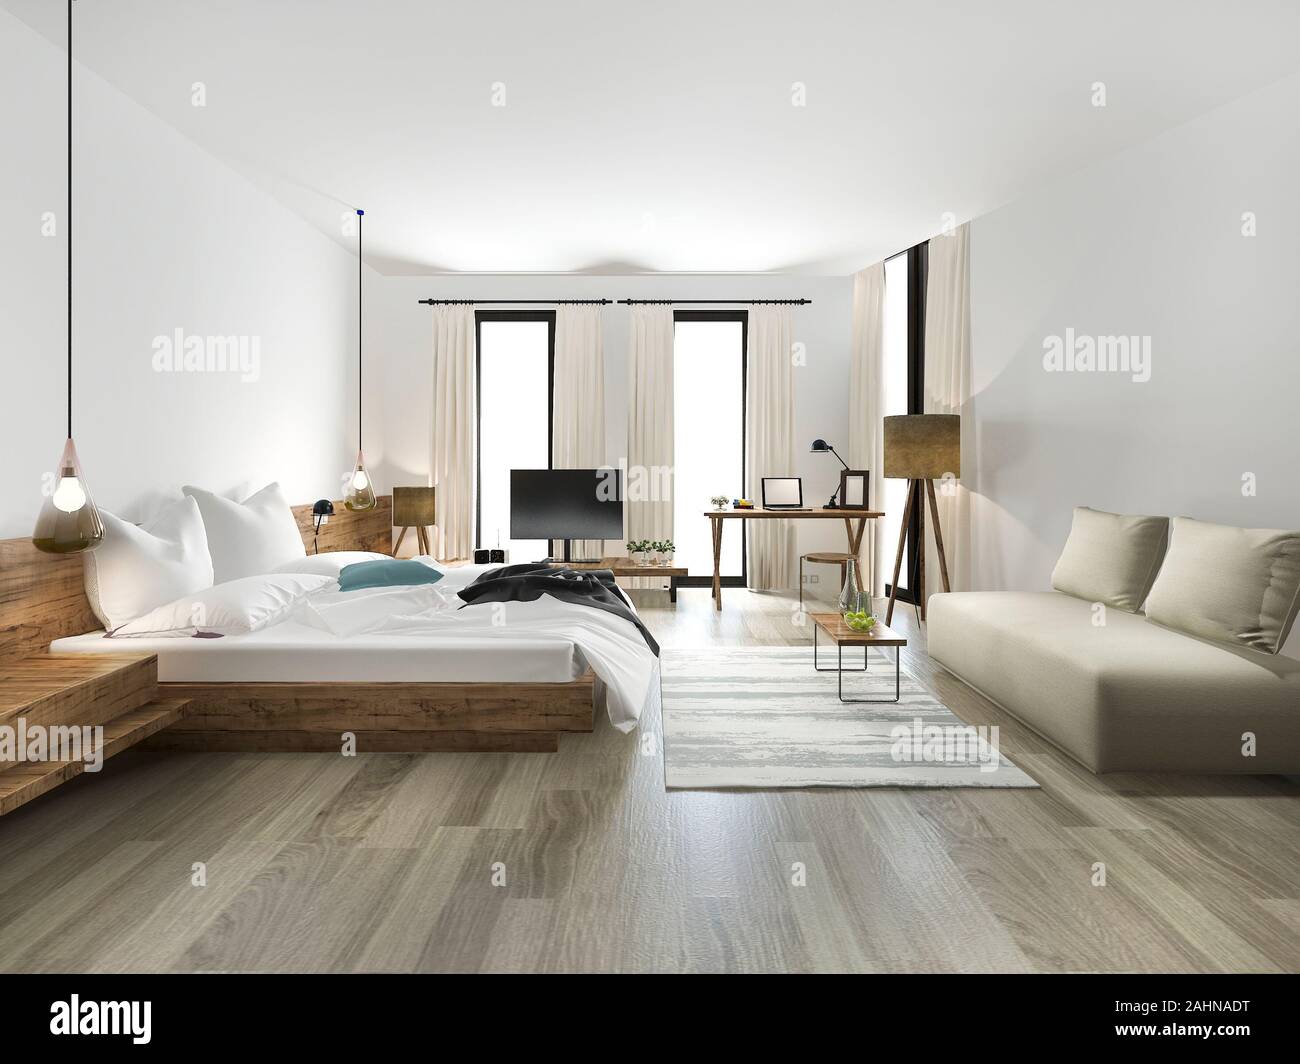 3d rendering wood minimal style bedroom with view from window Stock Photo